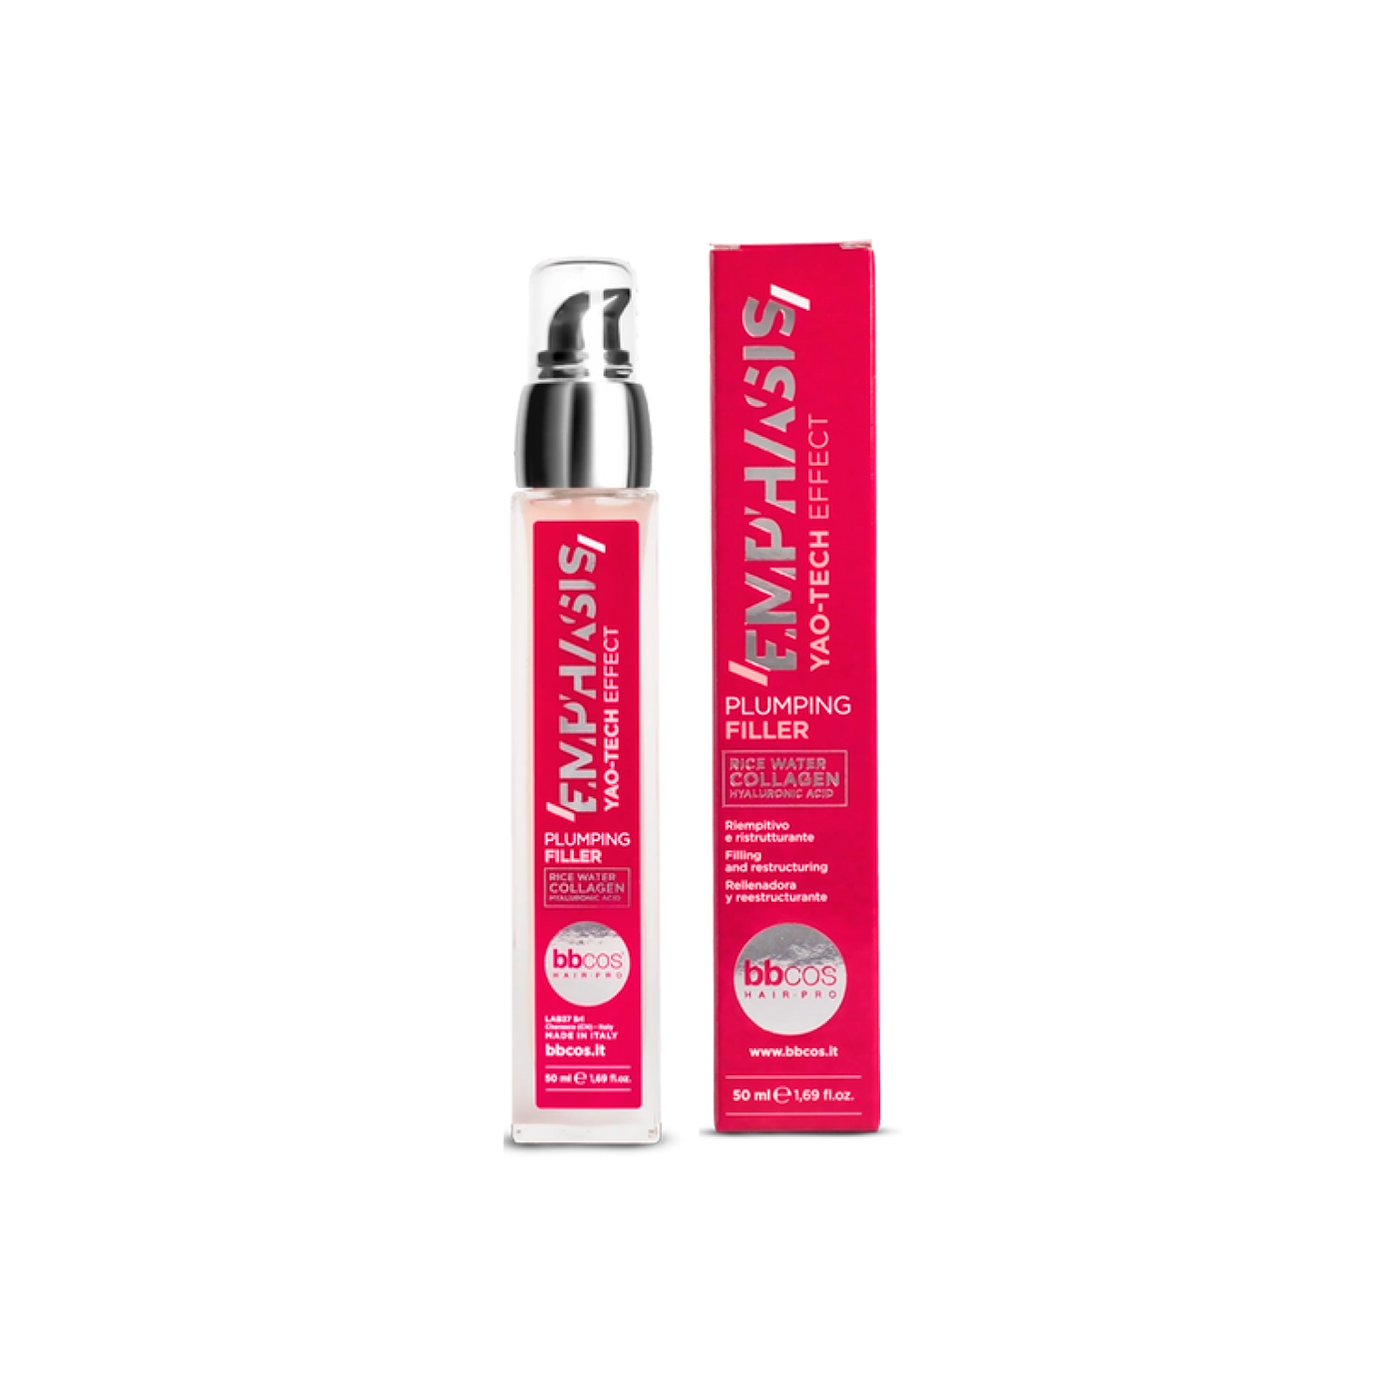 BBCOS - New! Pro Size Plumping Filler